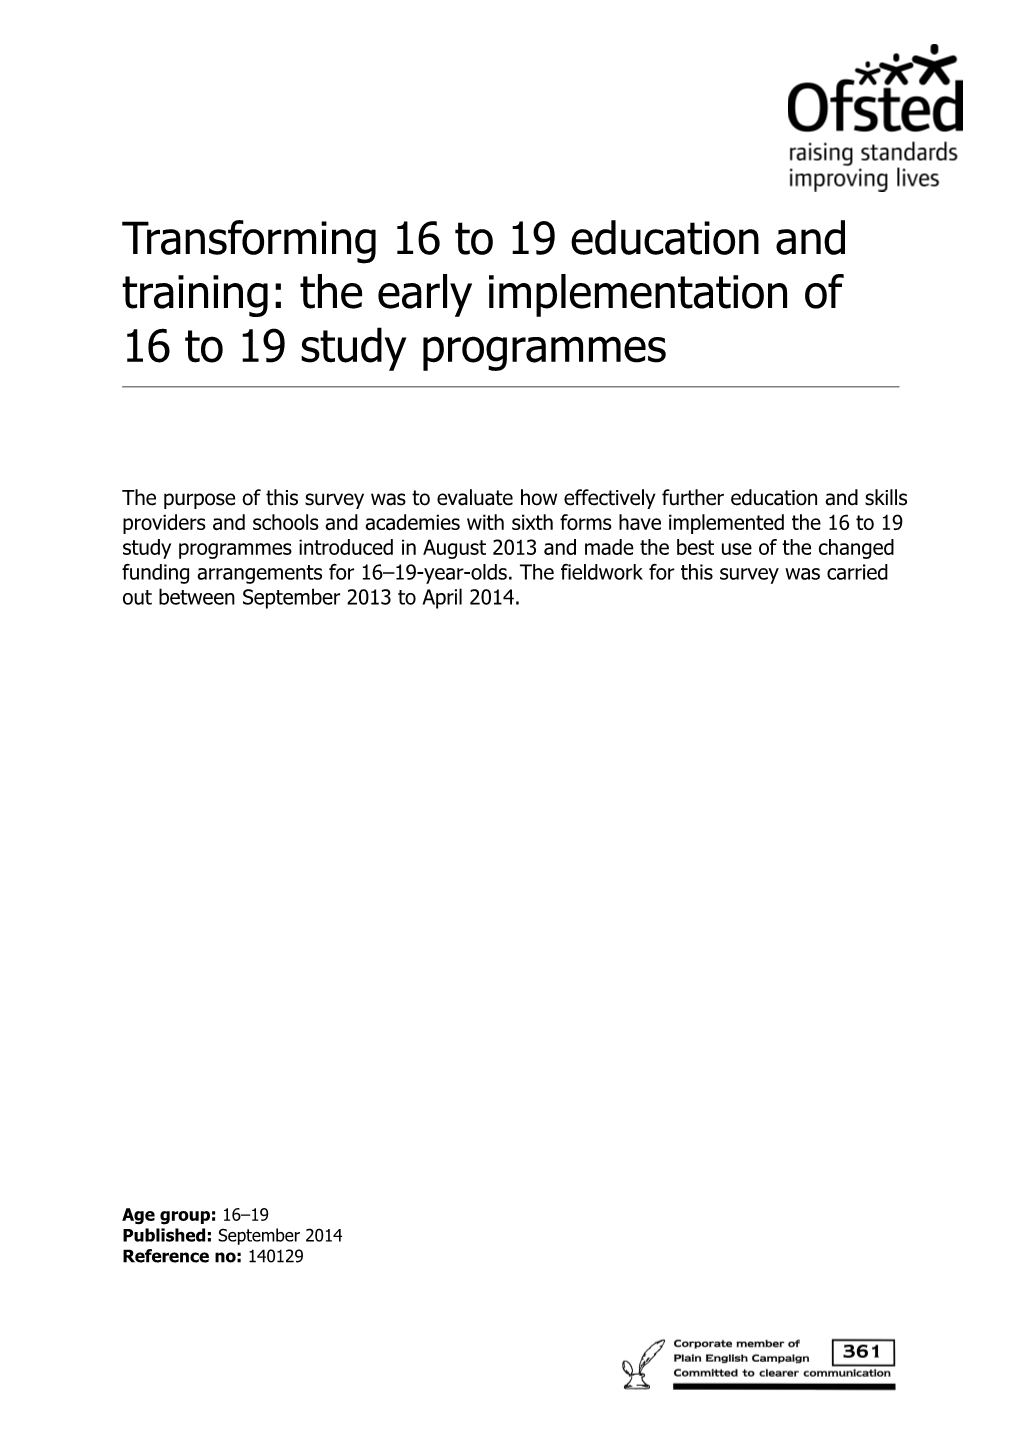 Transforming 16 to 19 Education and Training: the Early Implementation of 16 to 19 Study